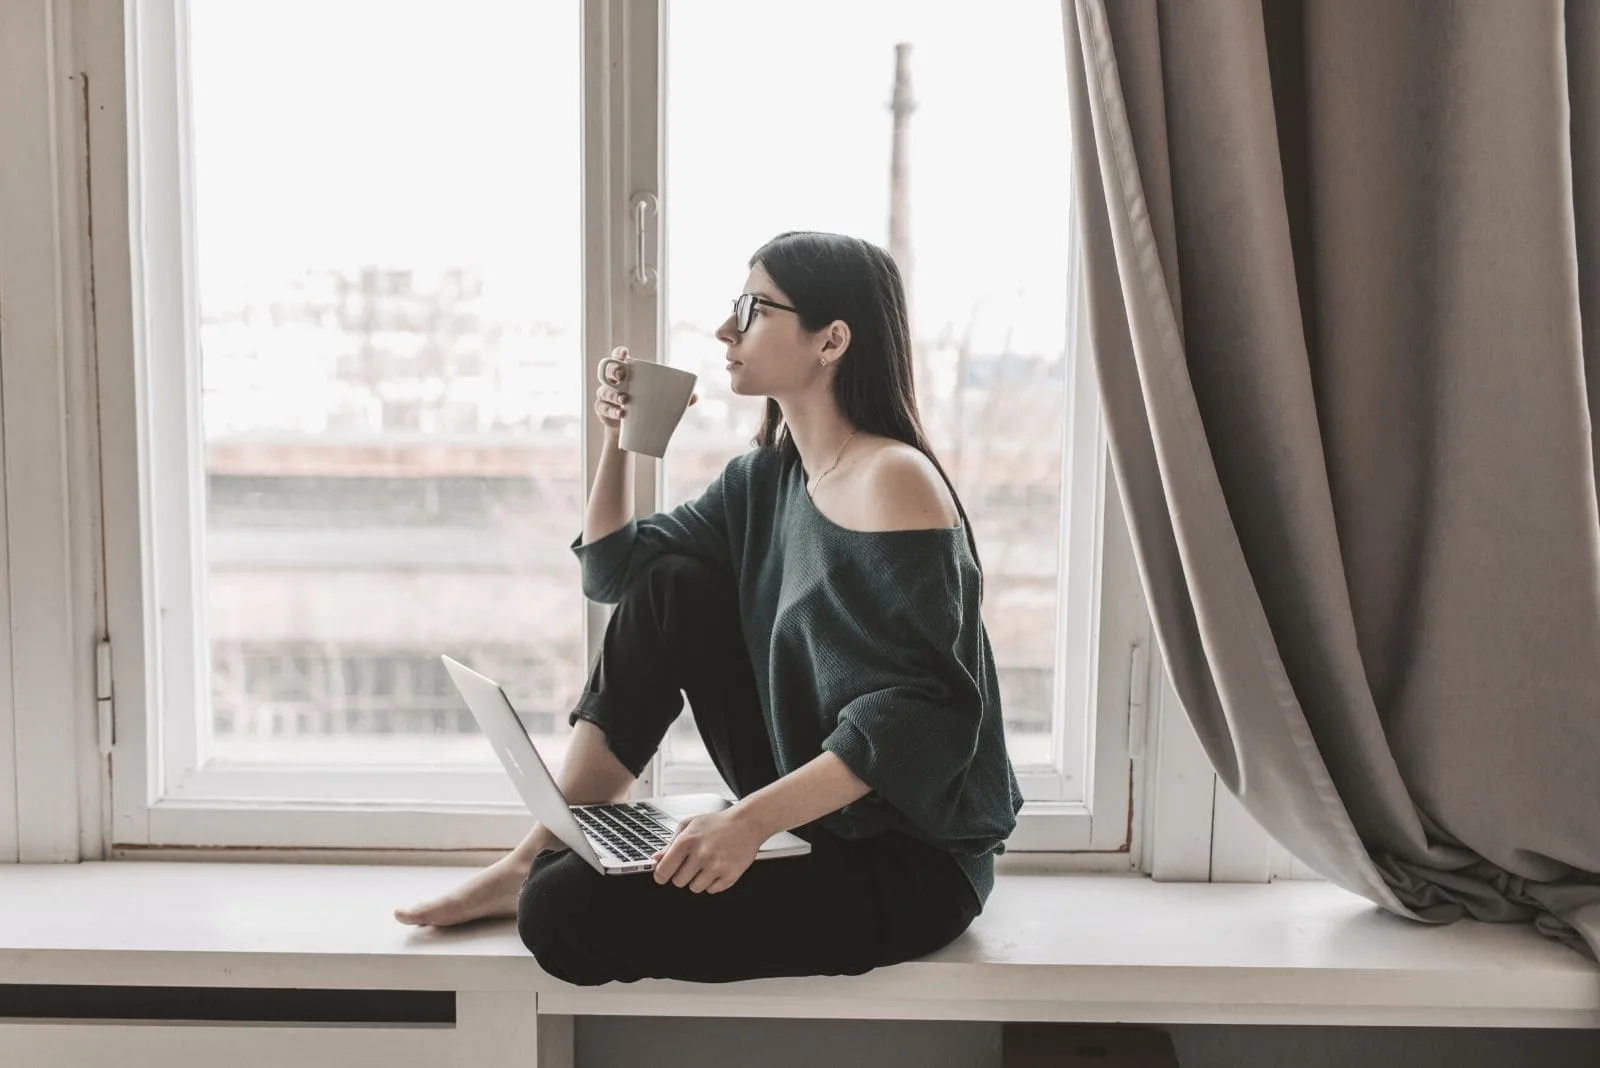 pensive woman with laptop drinking hot beverage sitting on the window sill